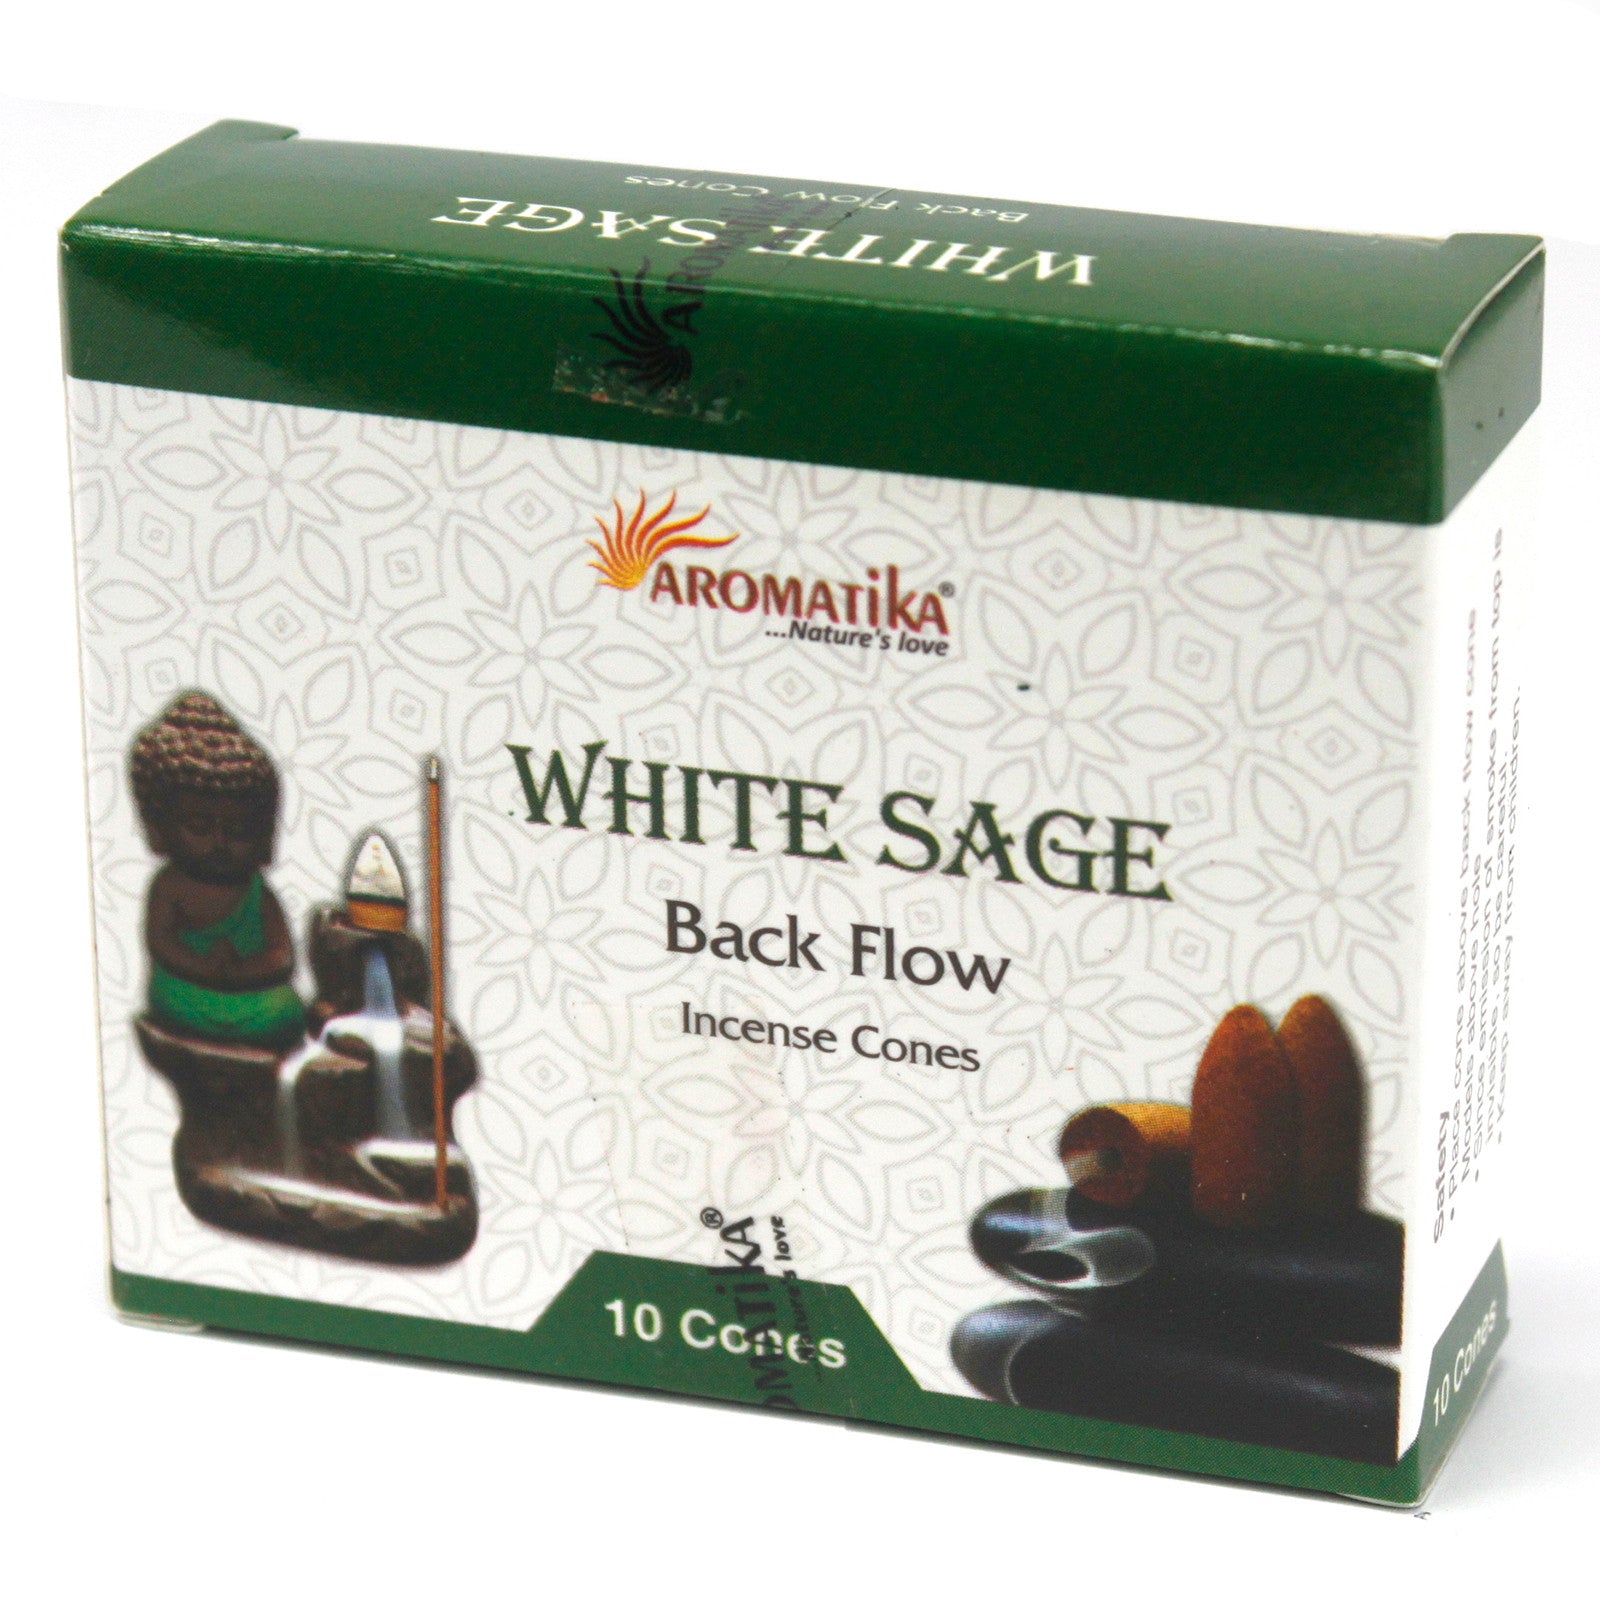 View Aromatica Backflow Incense Cones White Sage information